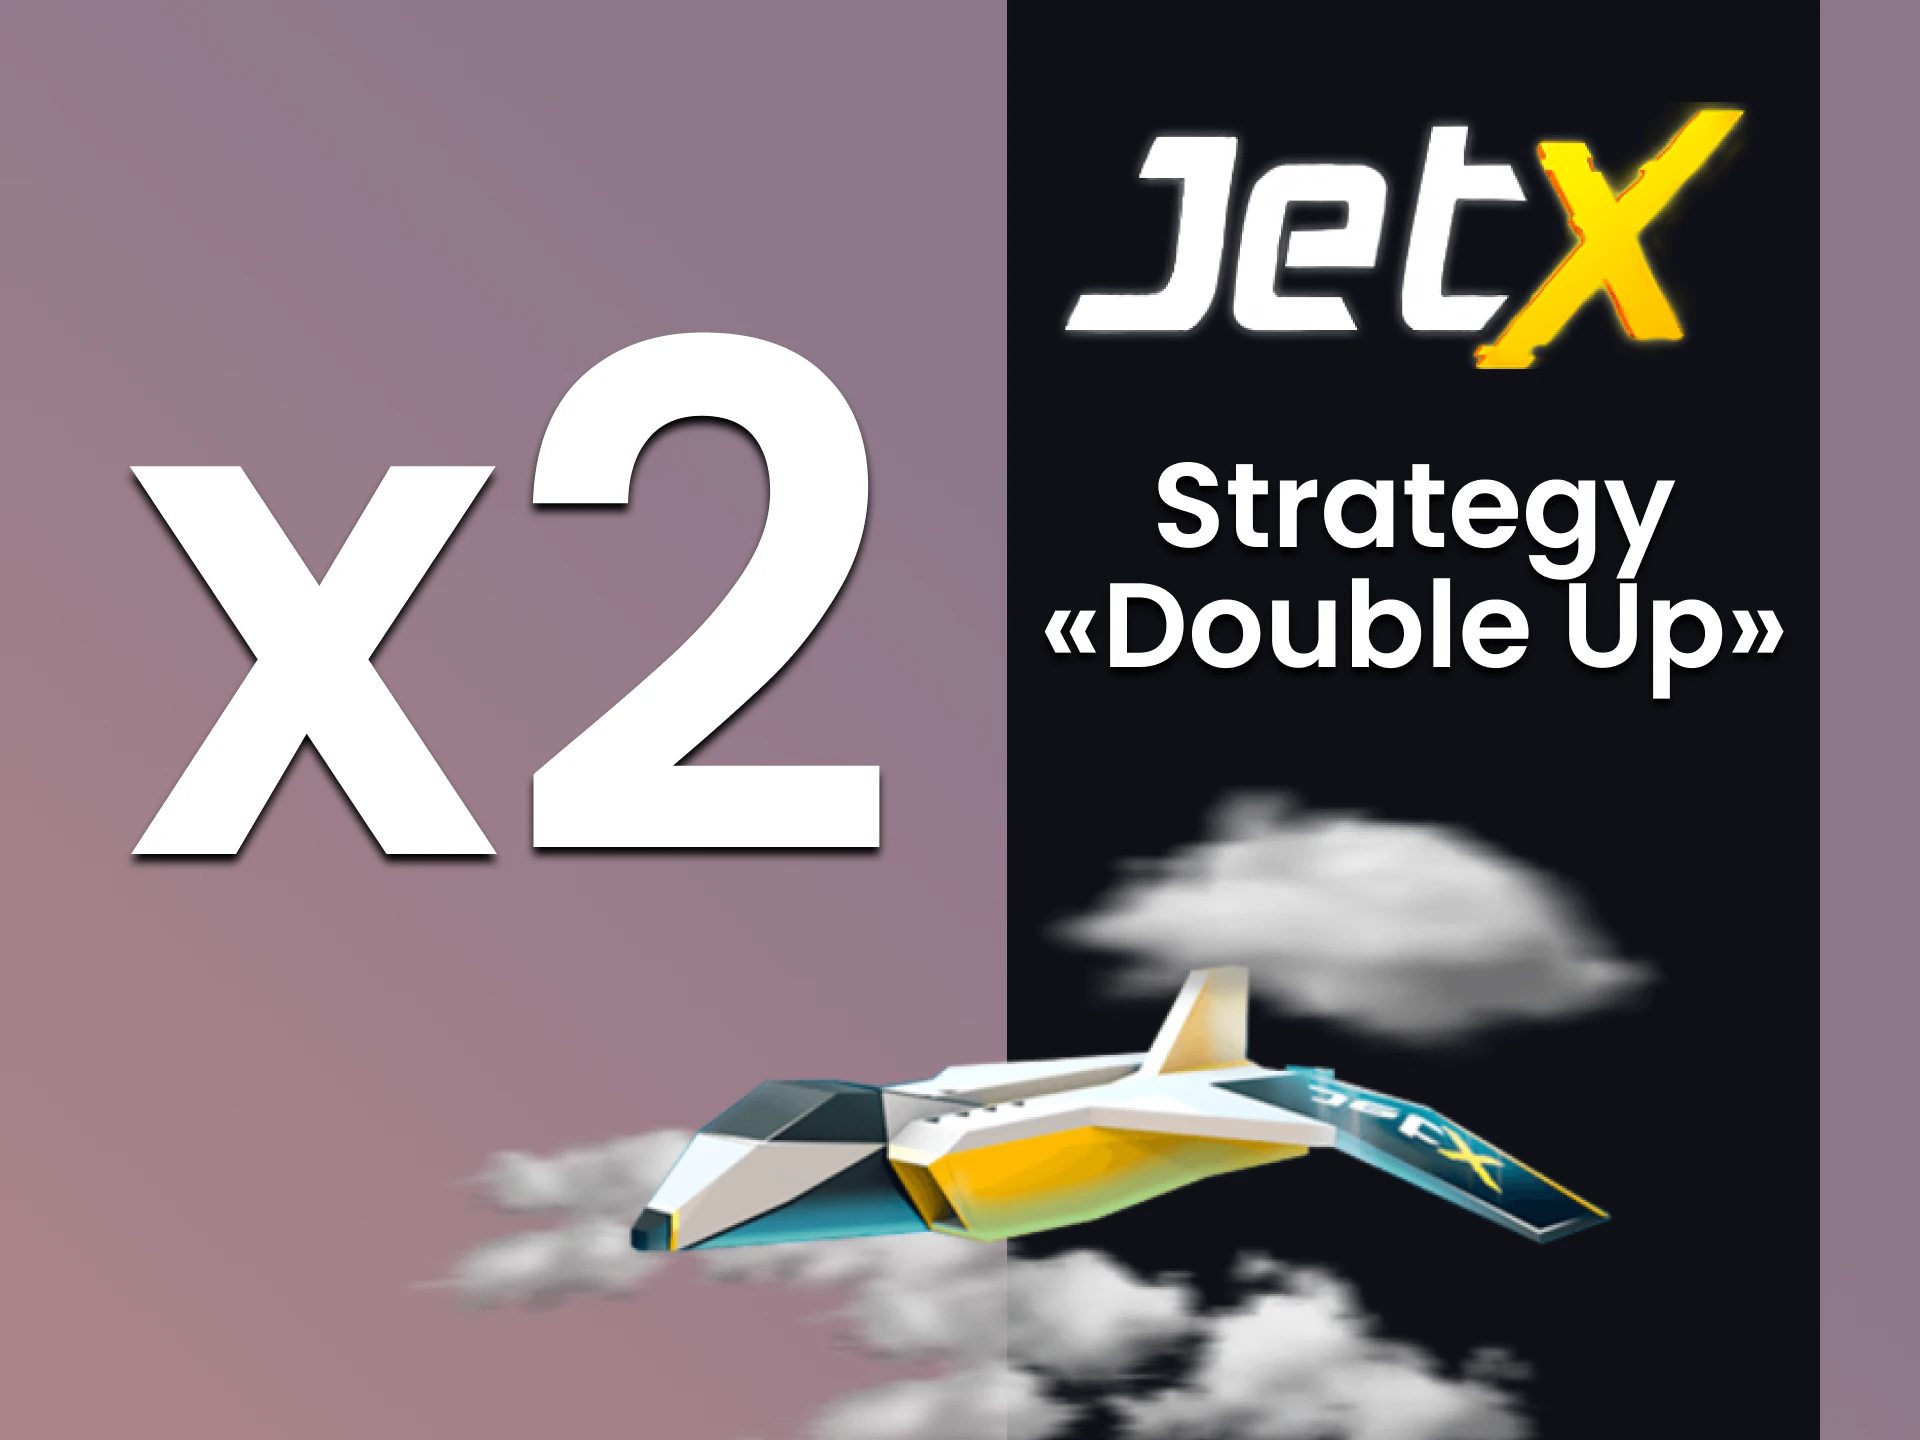 To win at JetX, choose the Double Up strategy.